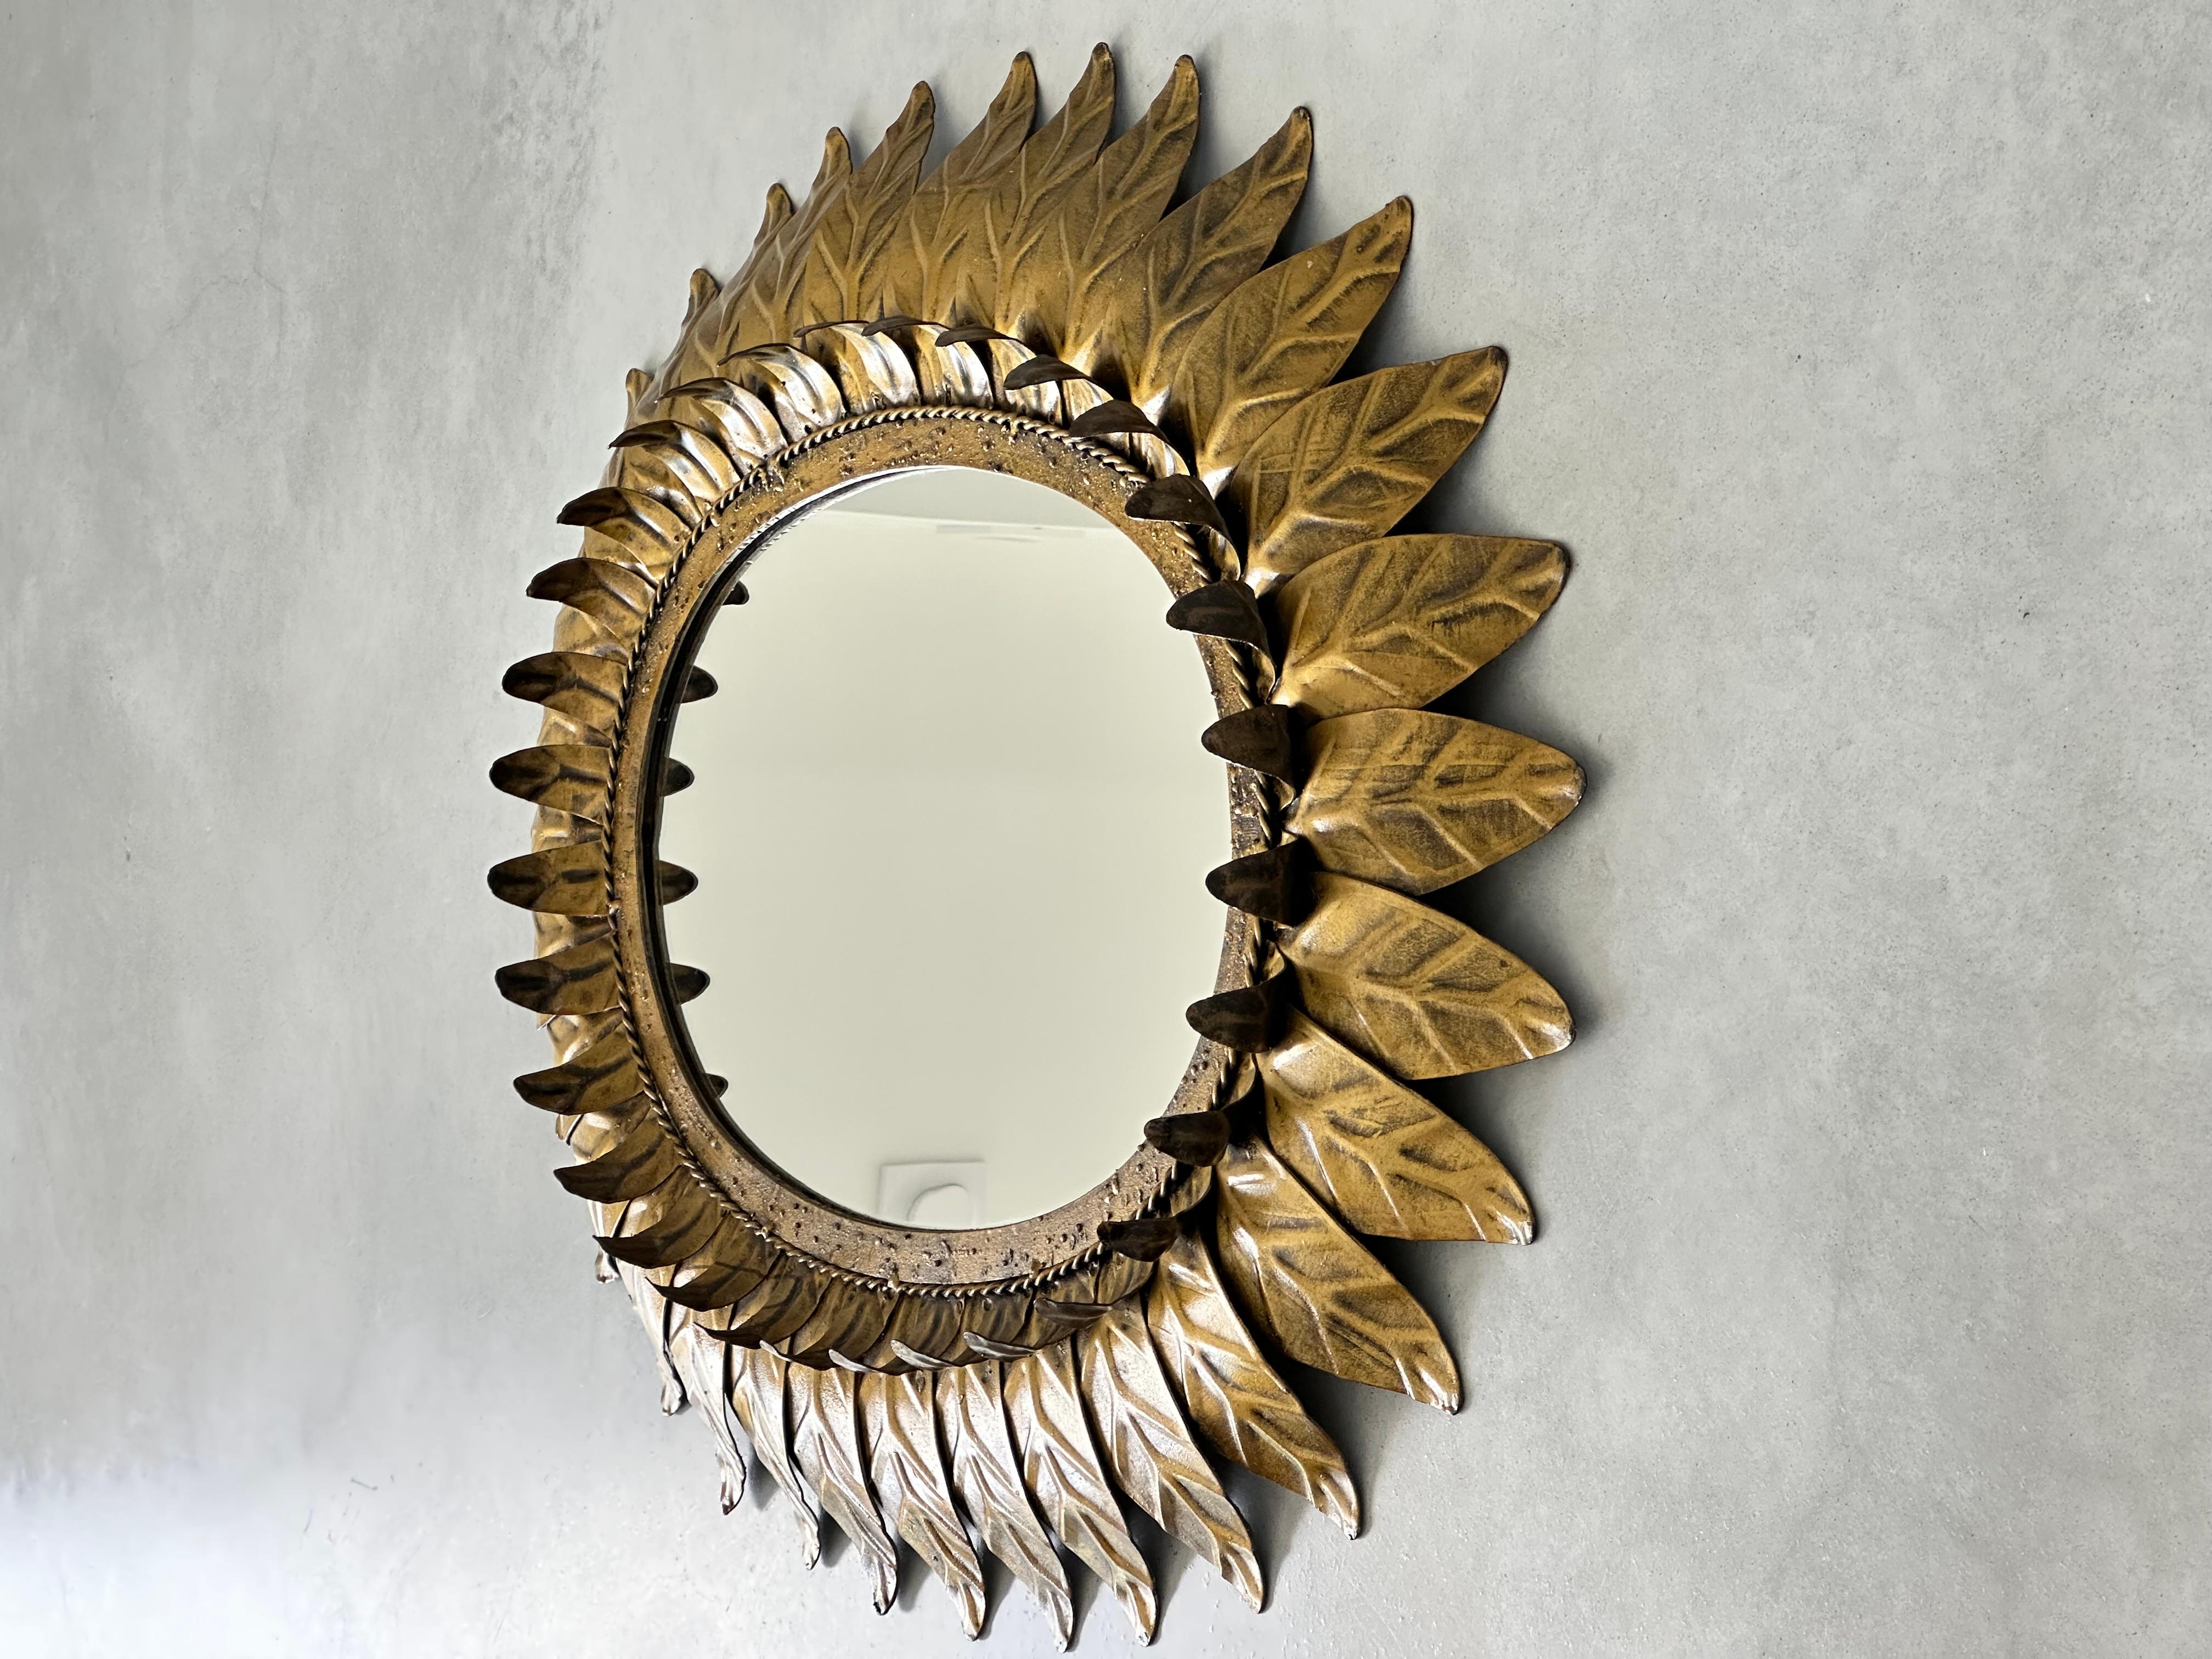 Spanish Colonial Large oval sunburst mirror, framed with gold-colored metal leaves, Spain 1960 For Sale